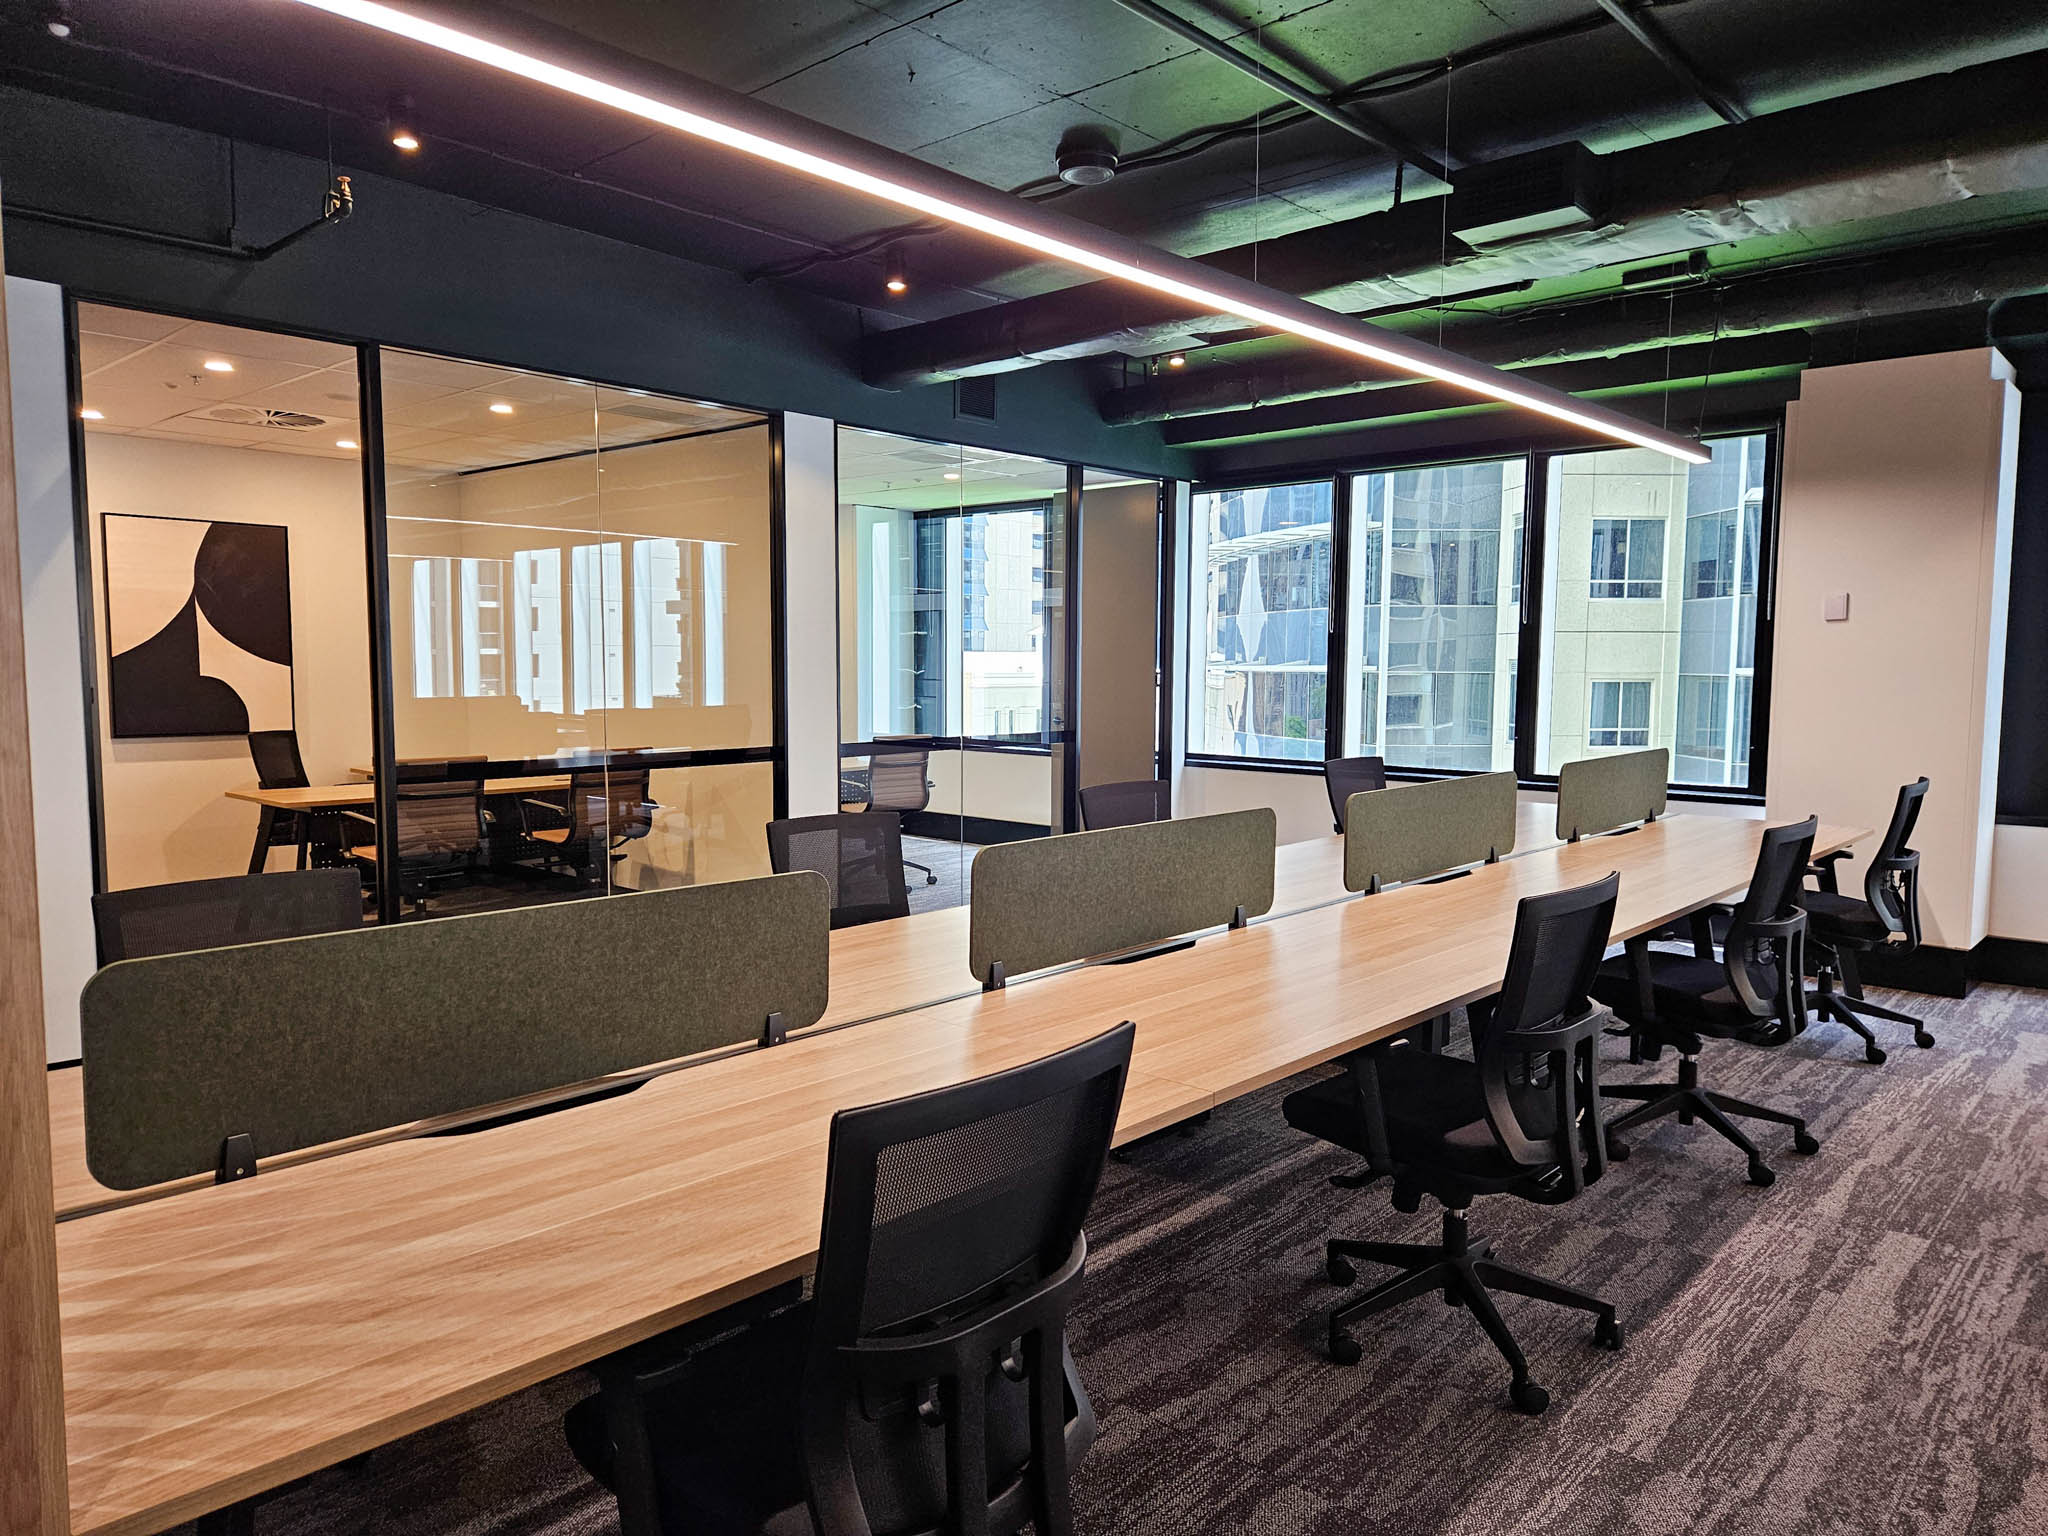 Office interior with workstations, chairs, and green acoustic screens